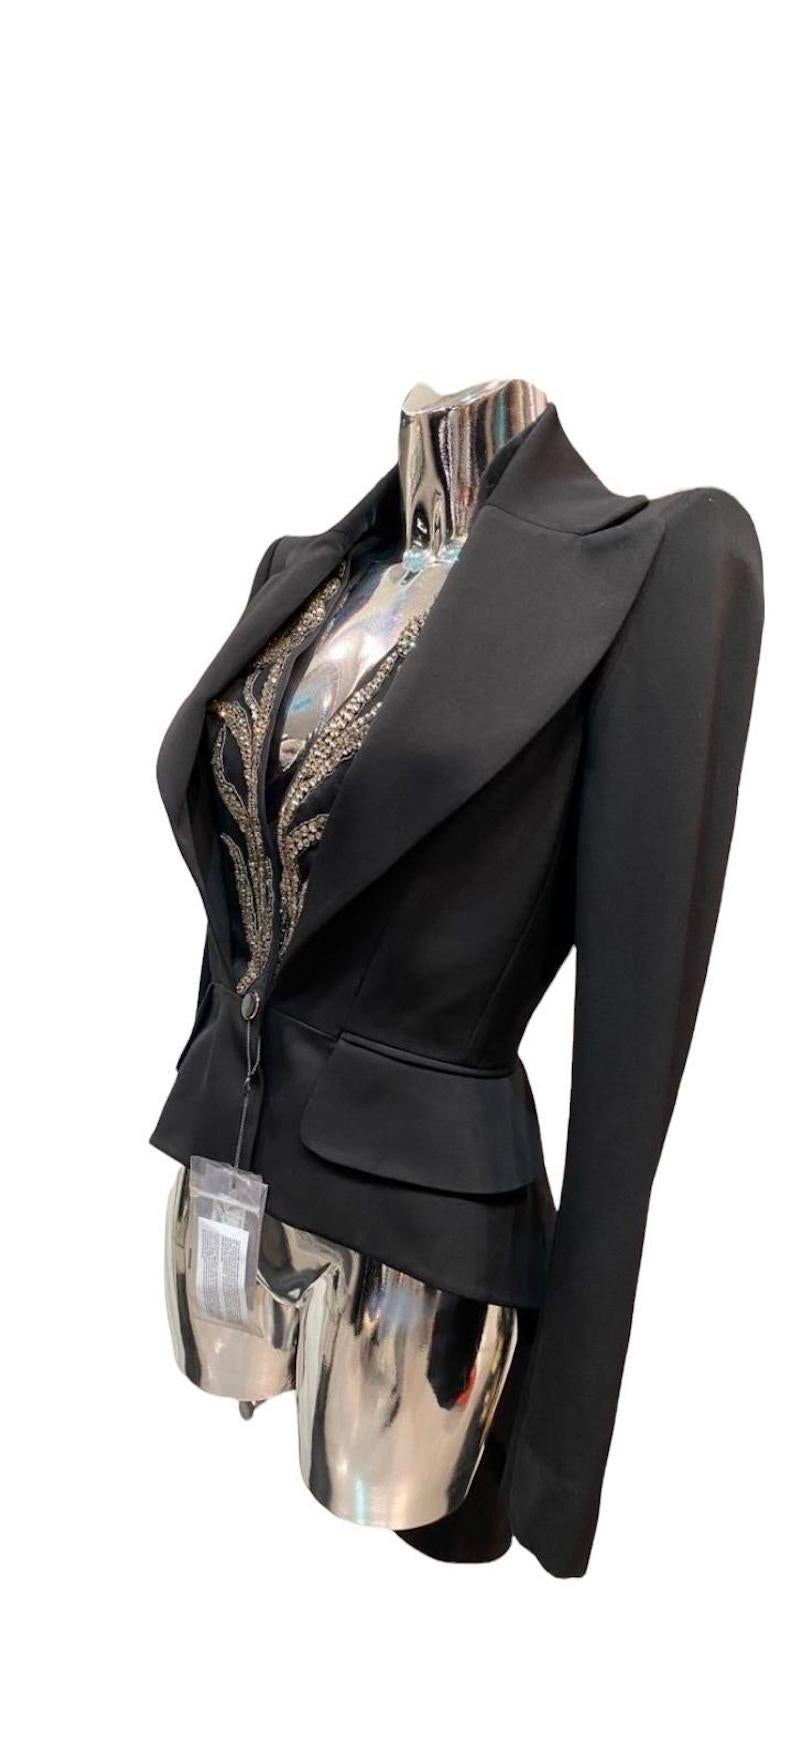 New Alexander McQueen Black Crystal embellished blazer jacket 
Size IT 42 -  US 6

New, with tags
Excellent condition